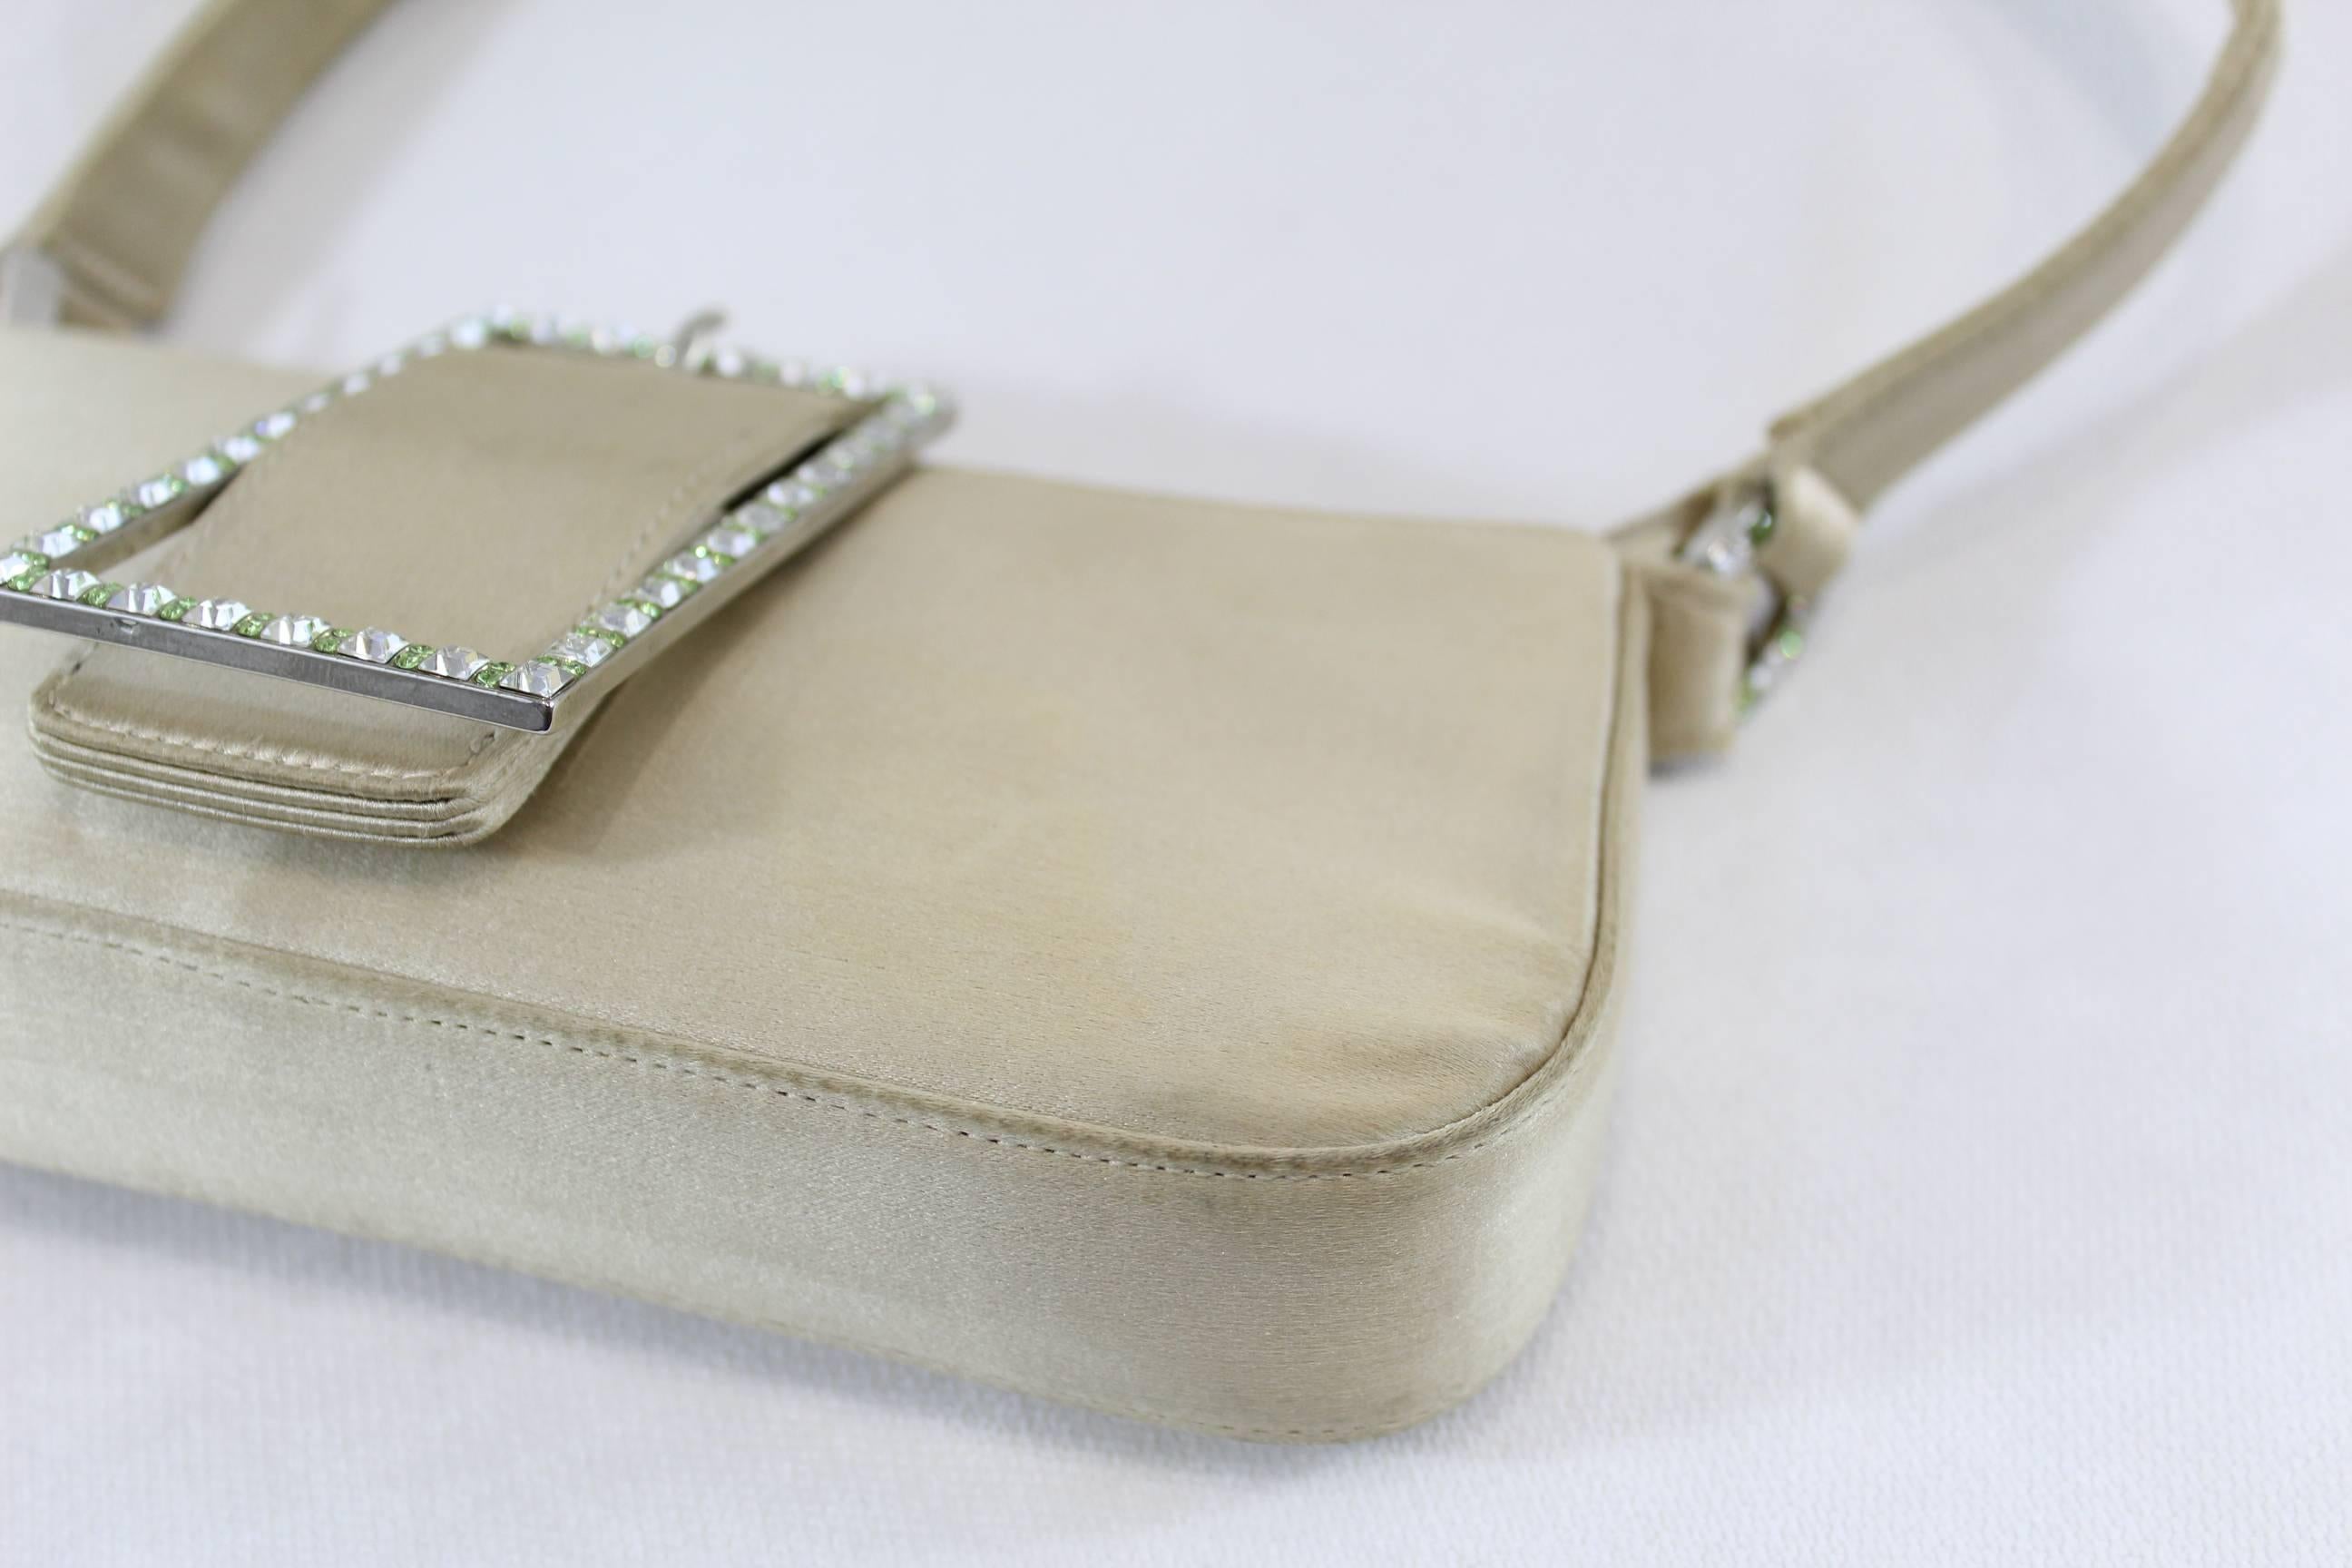 Really nice small Jimmy Choo weeding bag in silj with maxi lock with Swarovsky crystals.

Good condition but some signs of wear in corners. Small stain in one corner (see images)